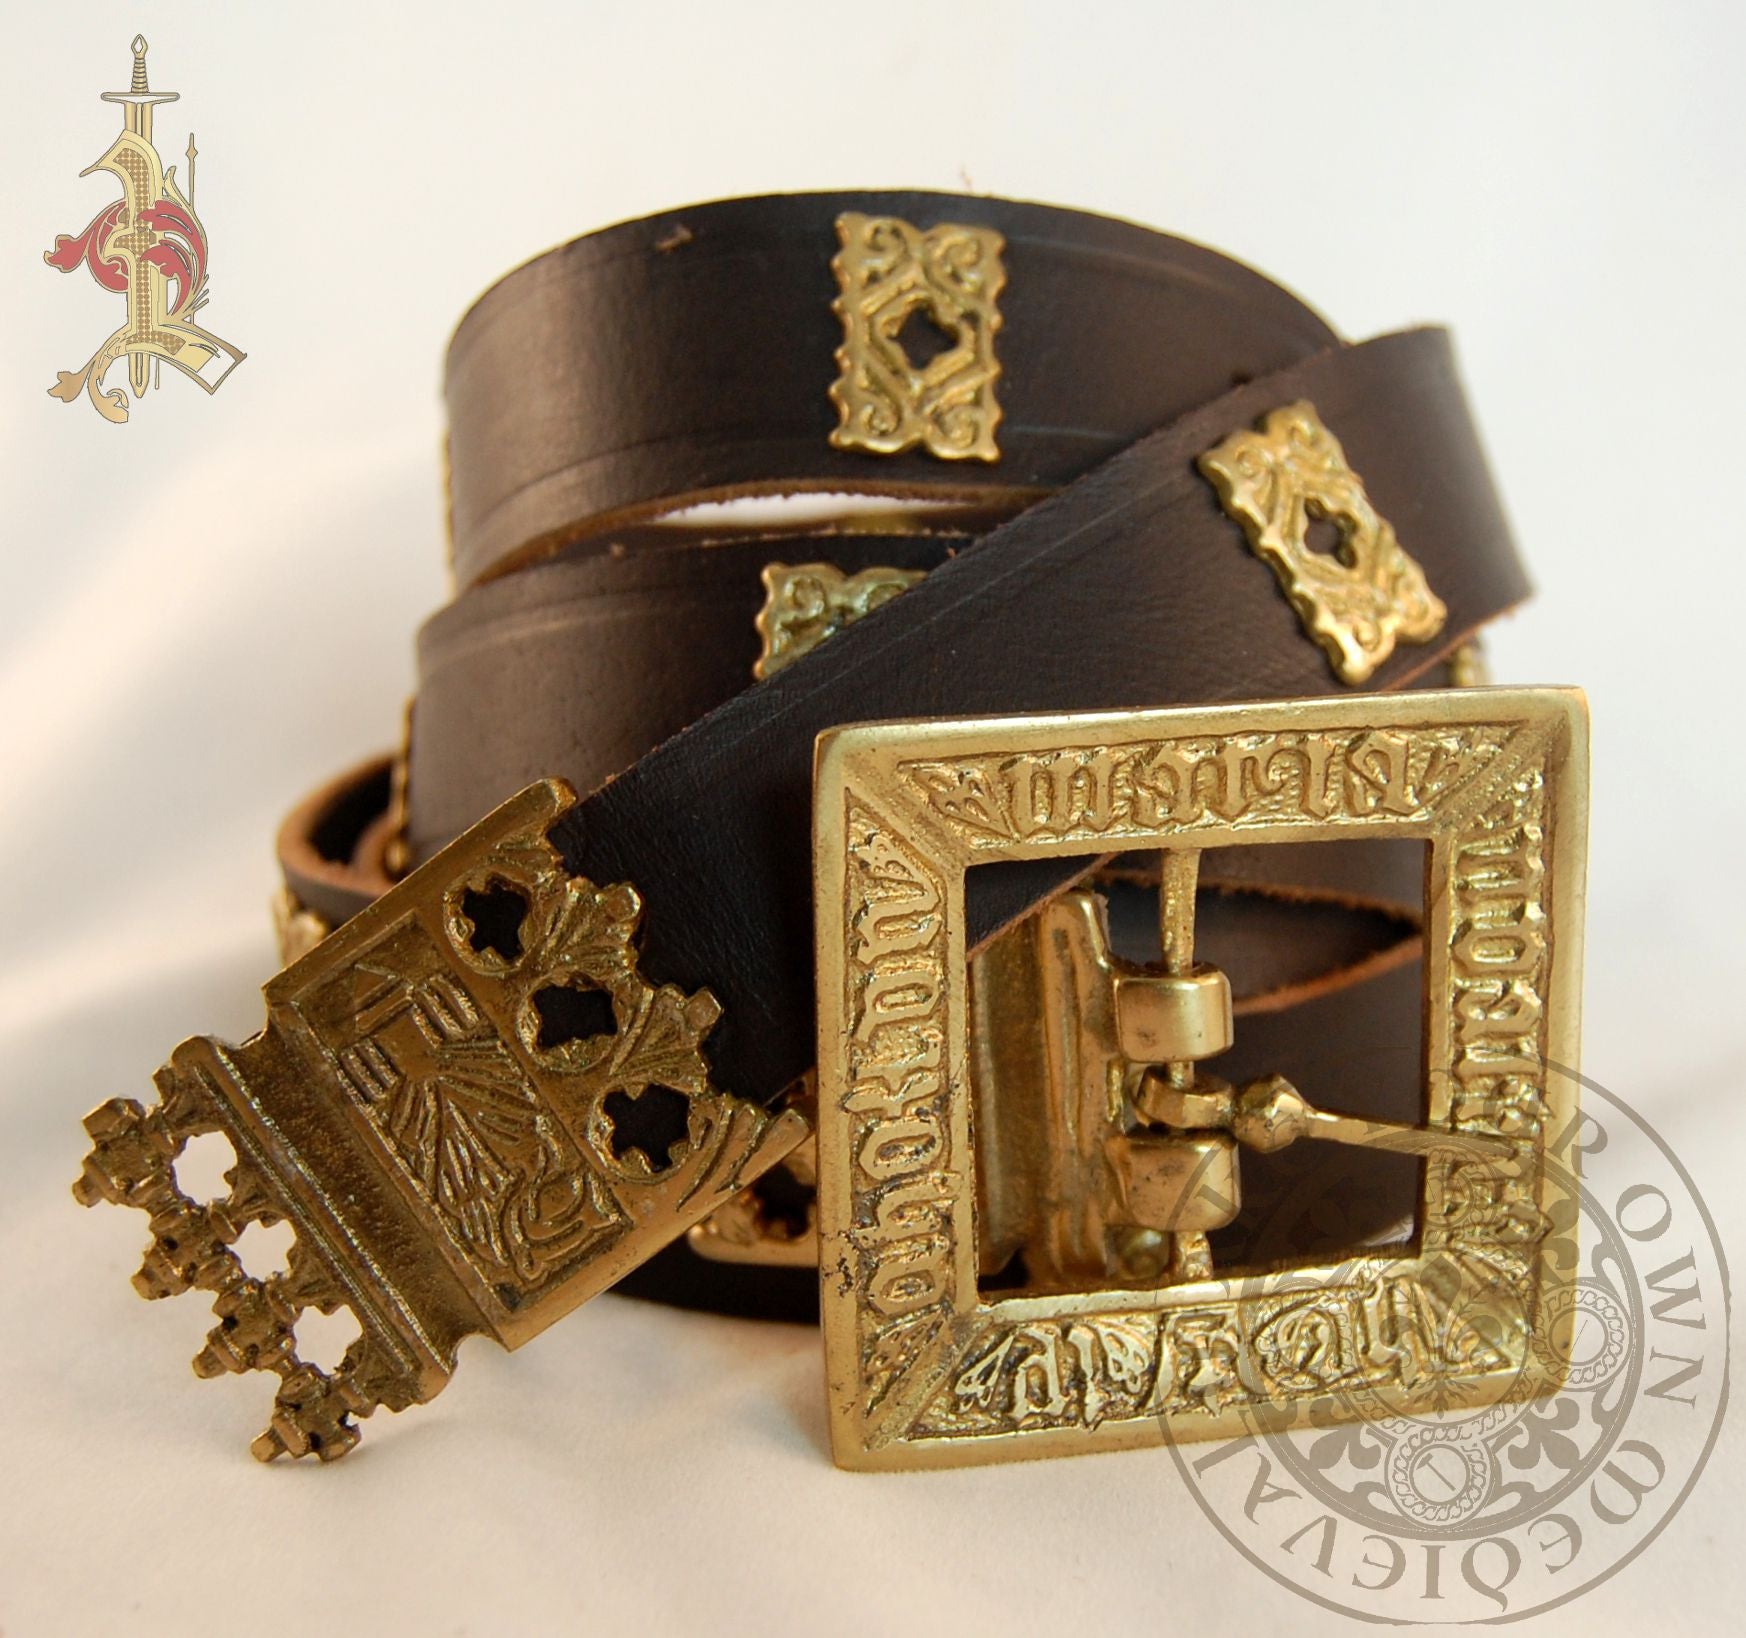 Medieval Knights Belt with Brass Buckle and Mounts | Make Your Own Medieval